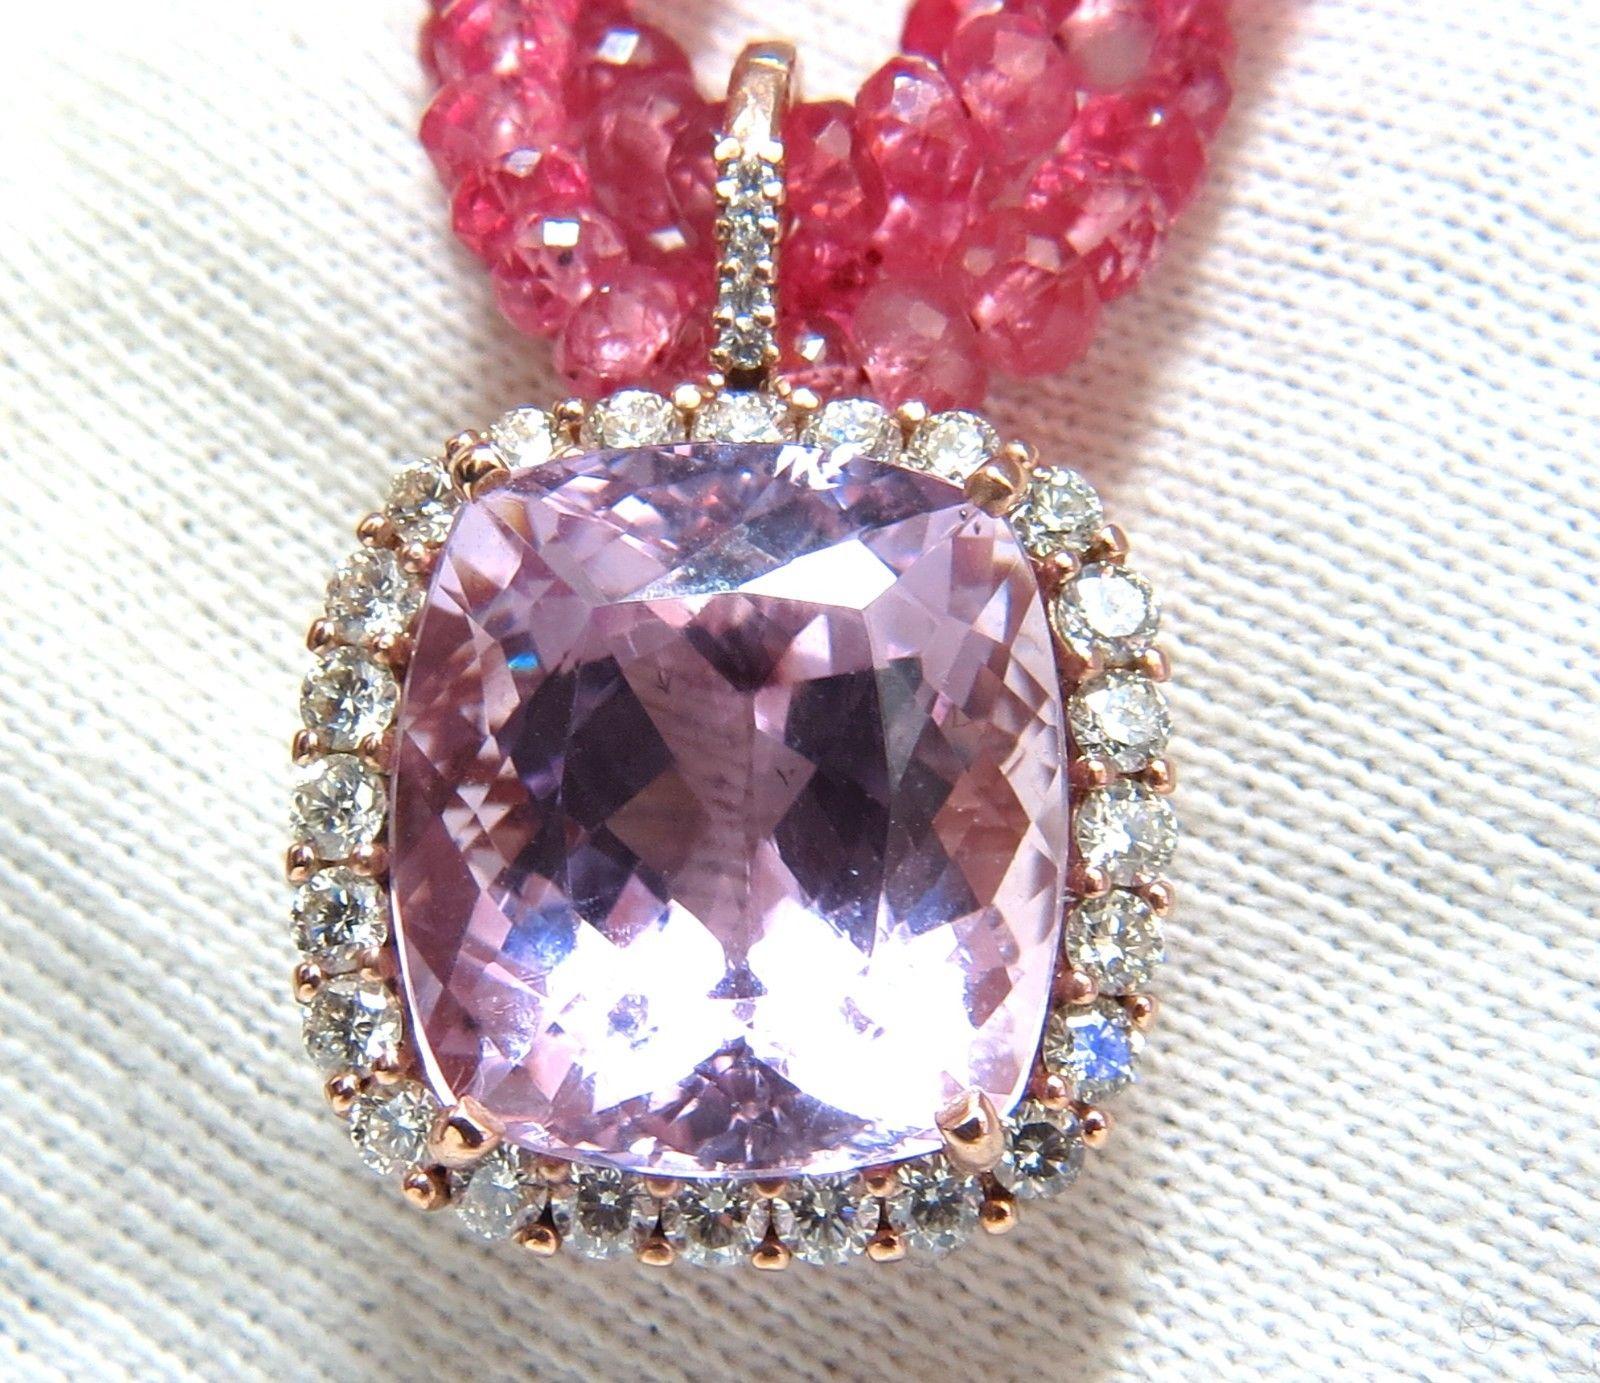 Cushion Cut 120.81ct Natural GIA Certified Kunzite Diamonds Spinel Necklace 18kt. Pinks